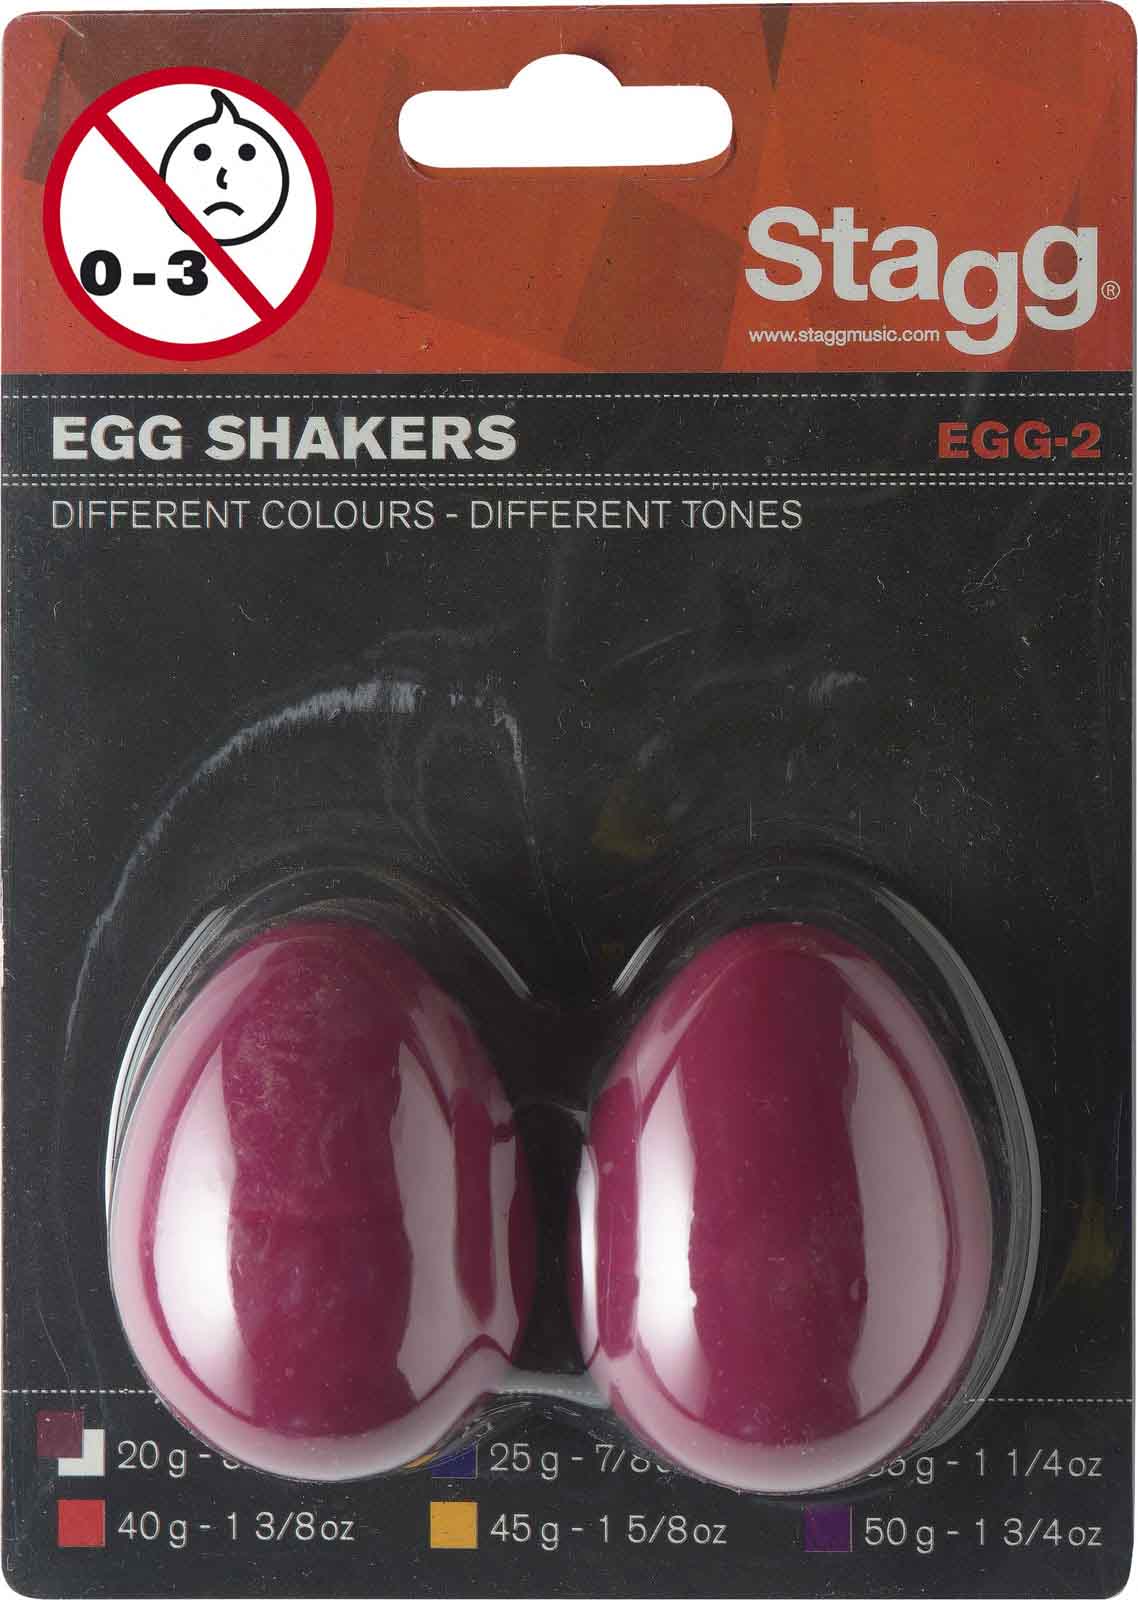 STAGG PAIRE SHAKER OEUF PLASTIQUE EGG-2 RD